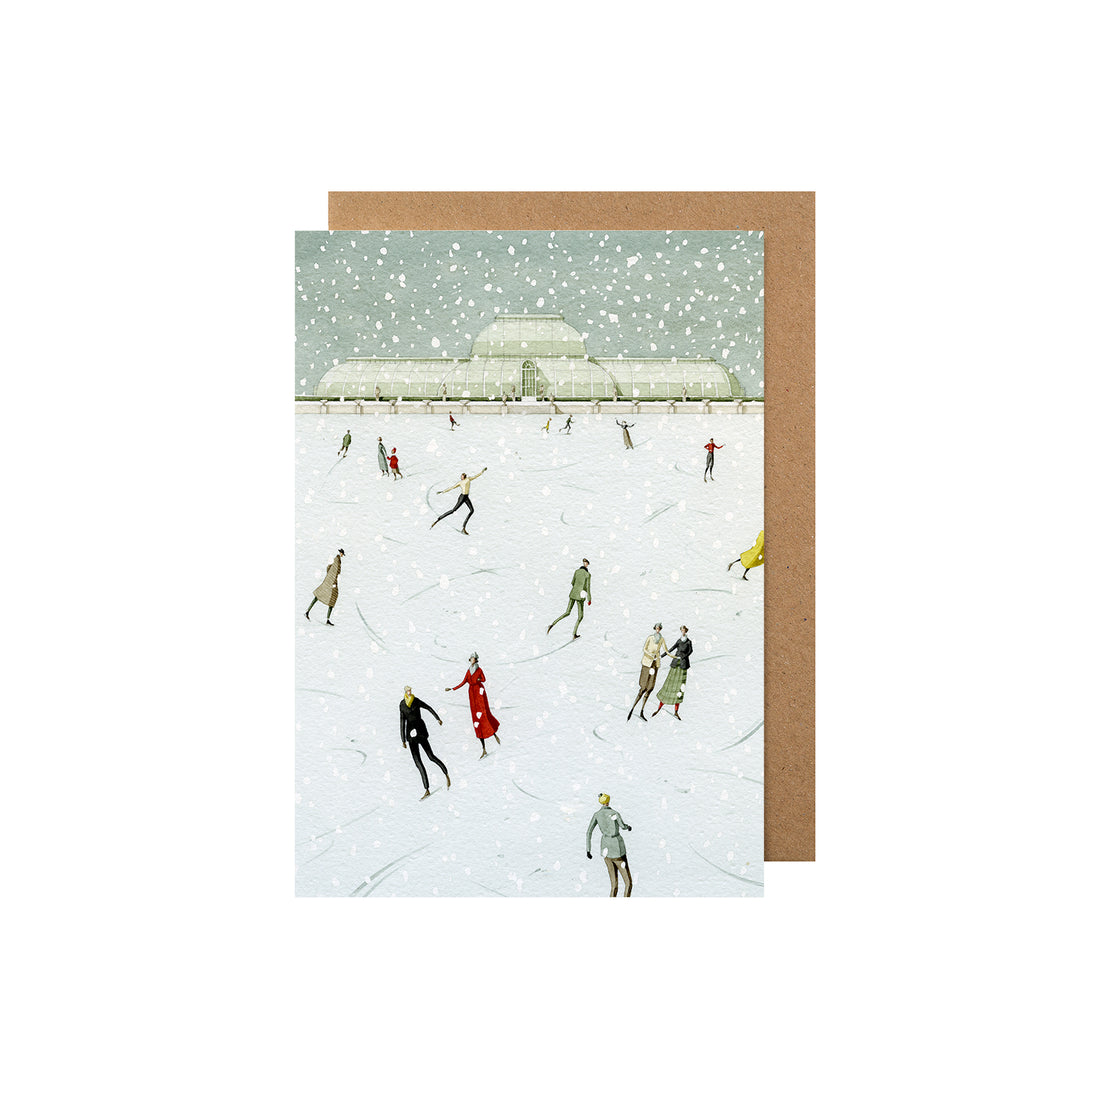 A Hester &amp; Cook Skating at Kew Card, Set of 10 with ice skaters on a snowy rink during the winter season.